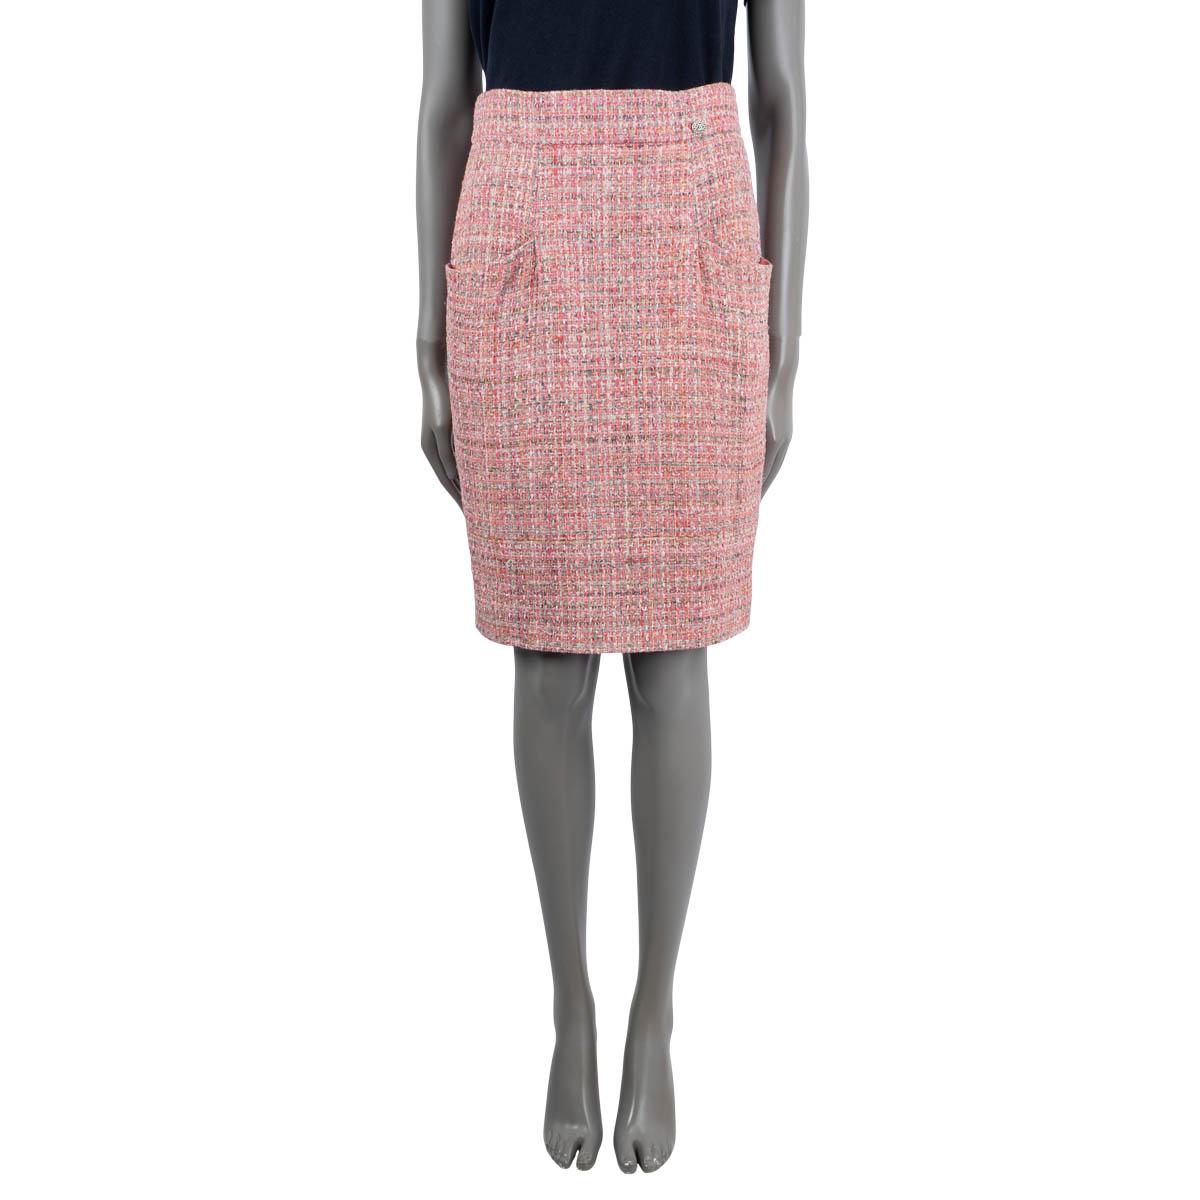 100% authentic Chanel tweed skirt in pink and multicolor nylon (81%), polyurethane (6%), acrylic (5%), rayon (3%), cotton (3%), mohair (1%) and wool (1%). Features braided metal and CC button at the waist. Opens with a concealed zipper in the back